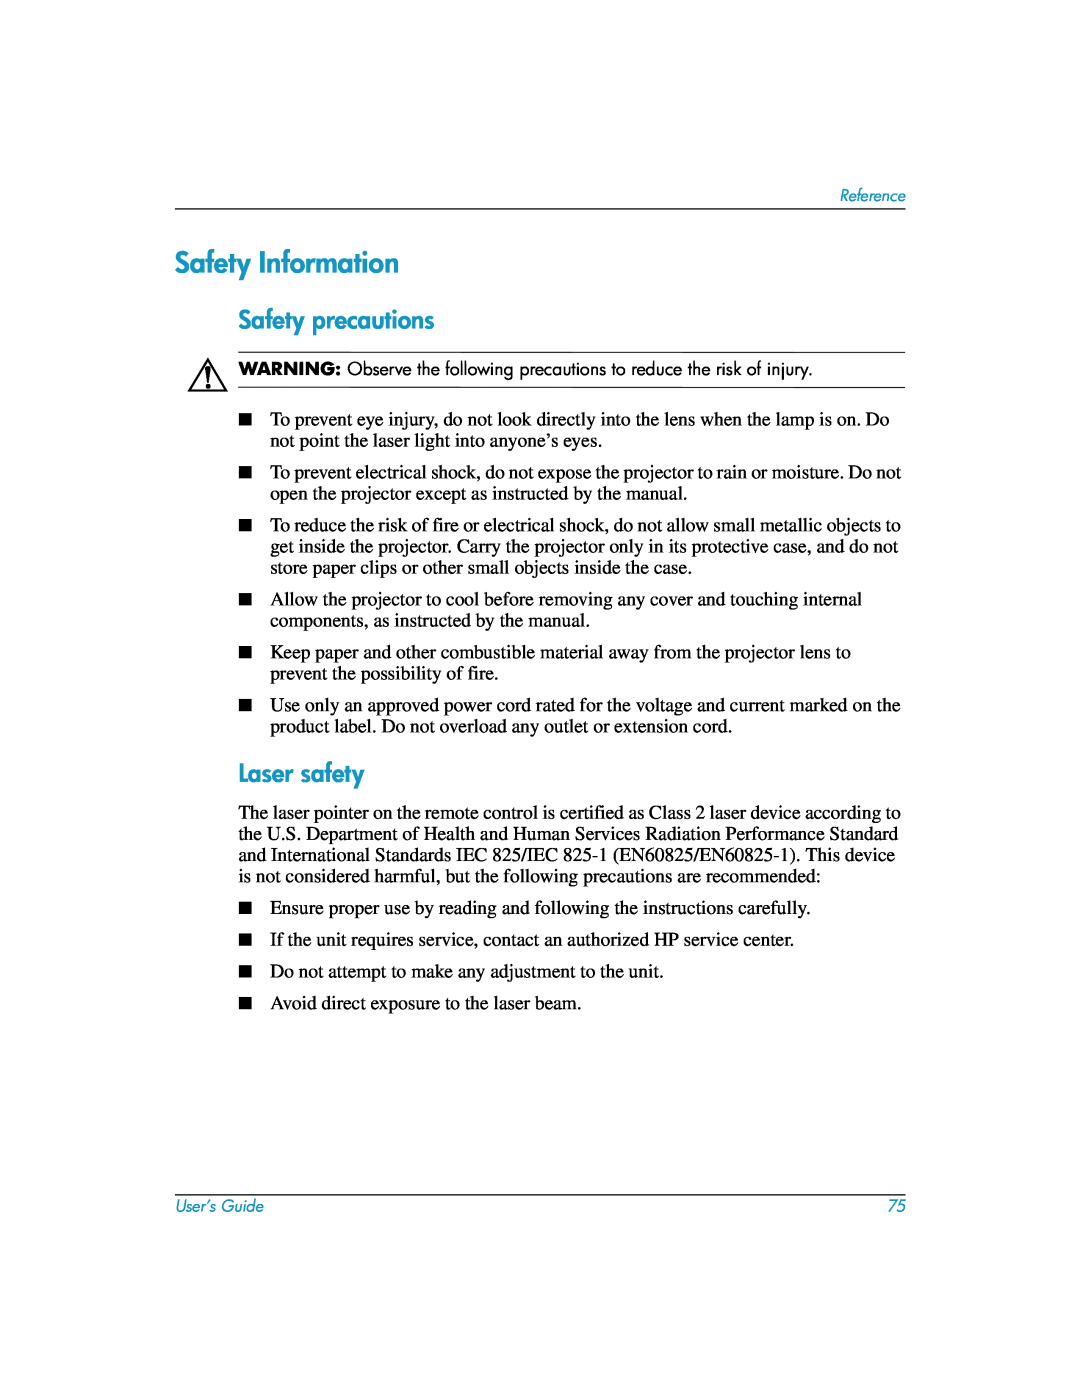 HP mp3135w manual Safety Information, Safety precautions, Laser safety 